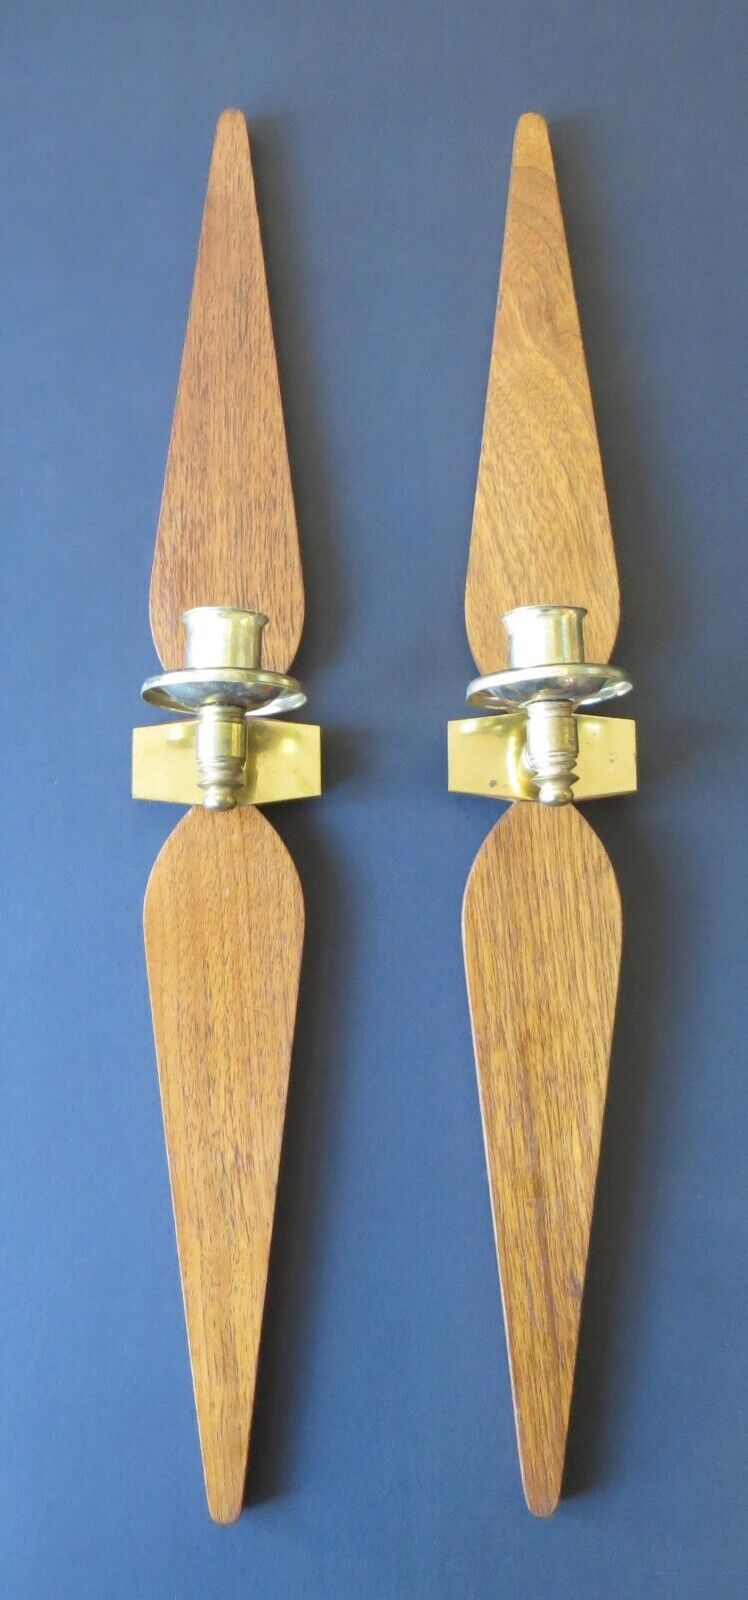 VTG. PAIR of 60's MID CENTURY WALNUT and BRASS STARBURST CANDLE HOLDERS SCONCES